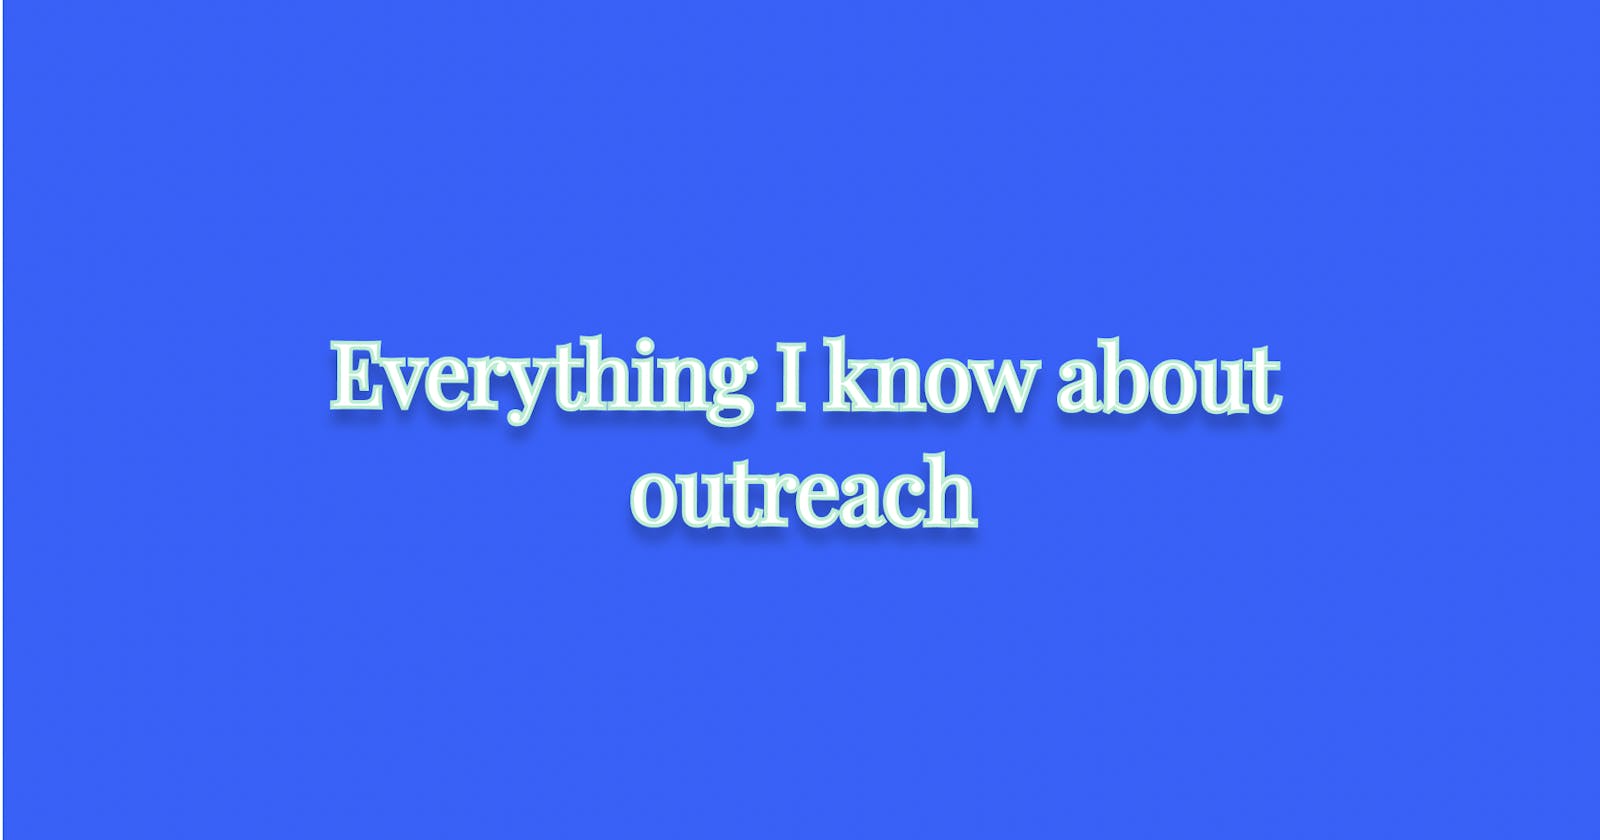 Everything I know about outreach